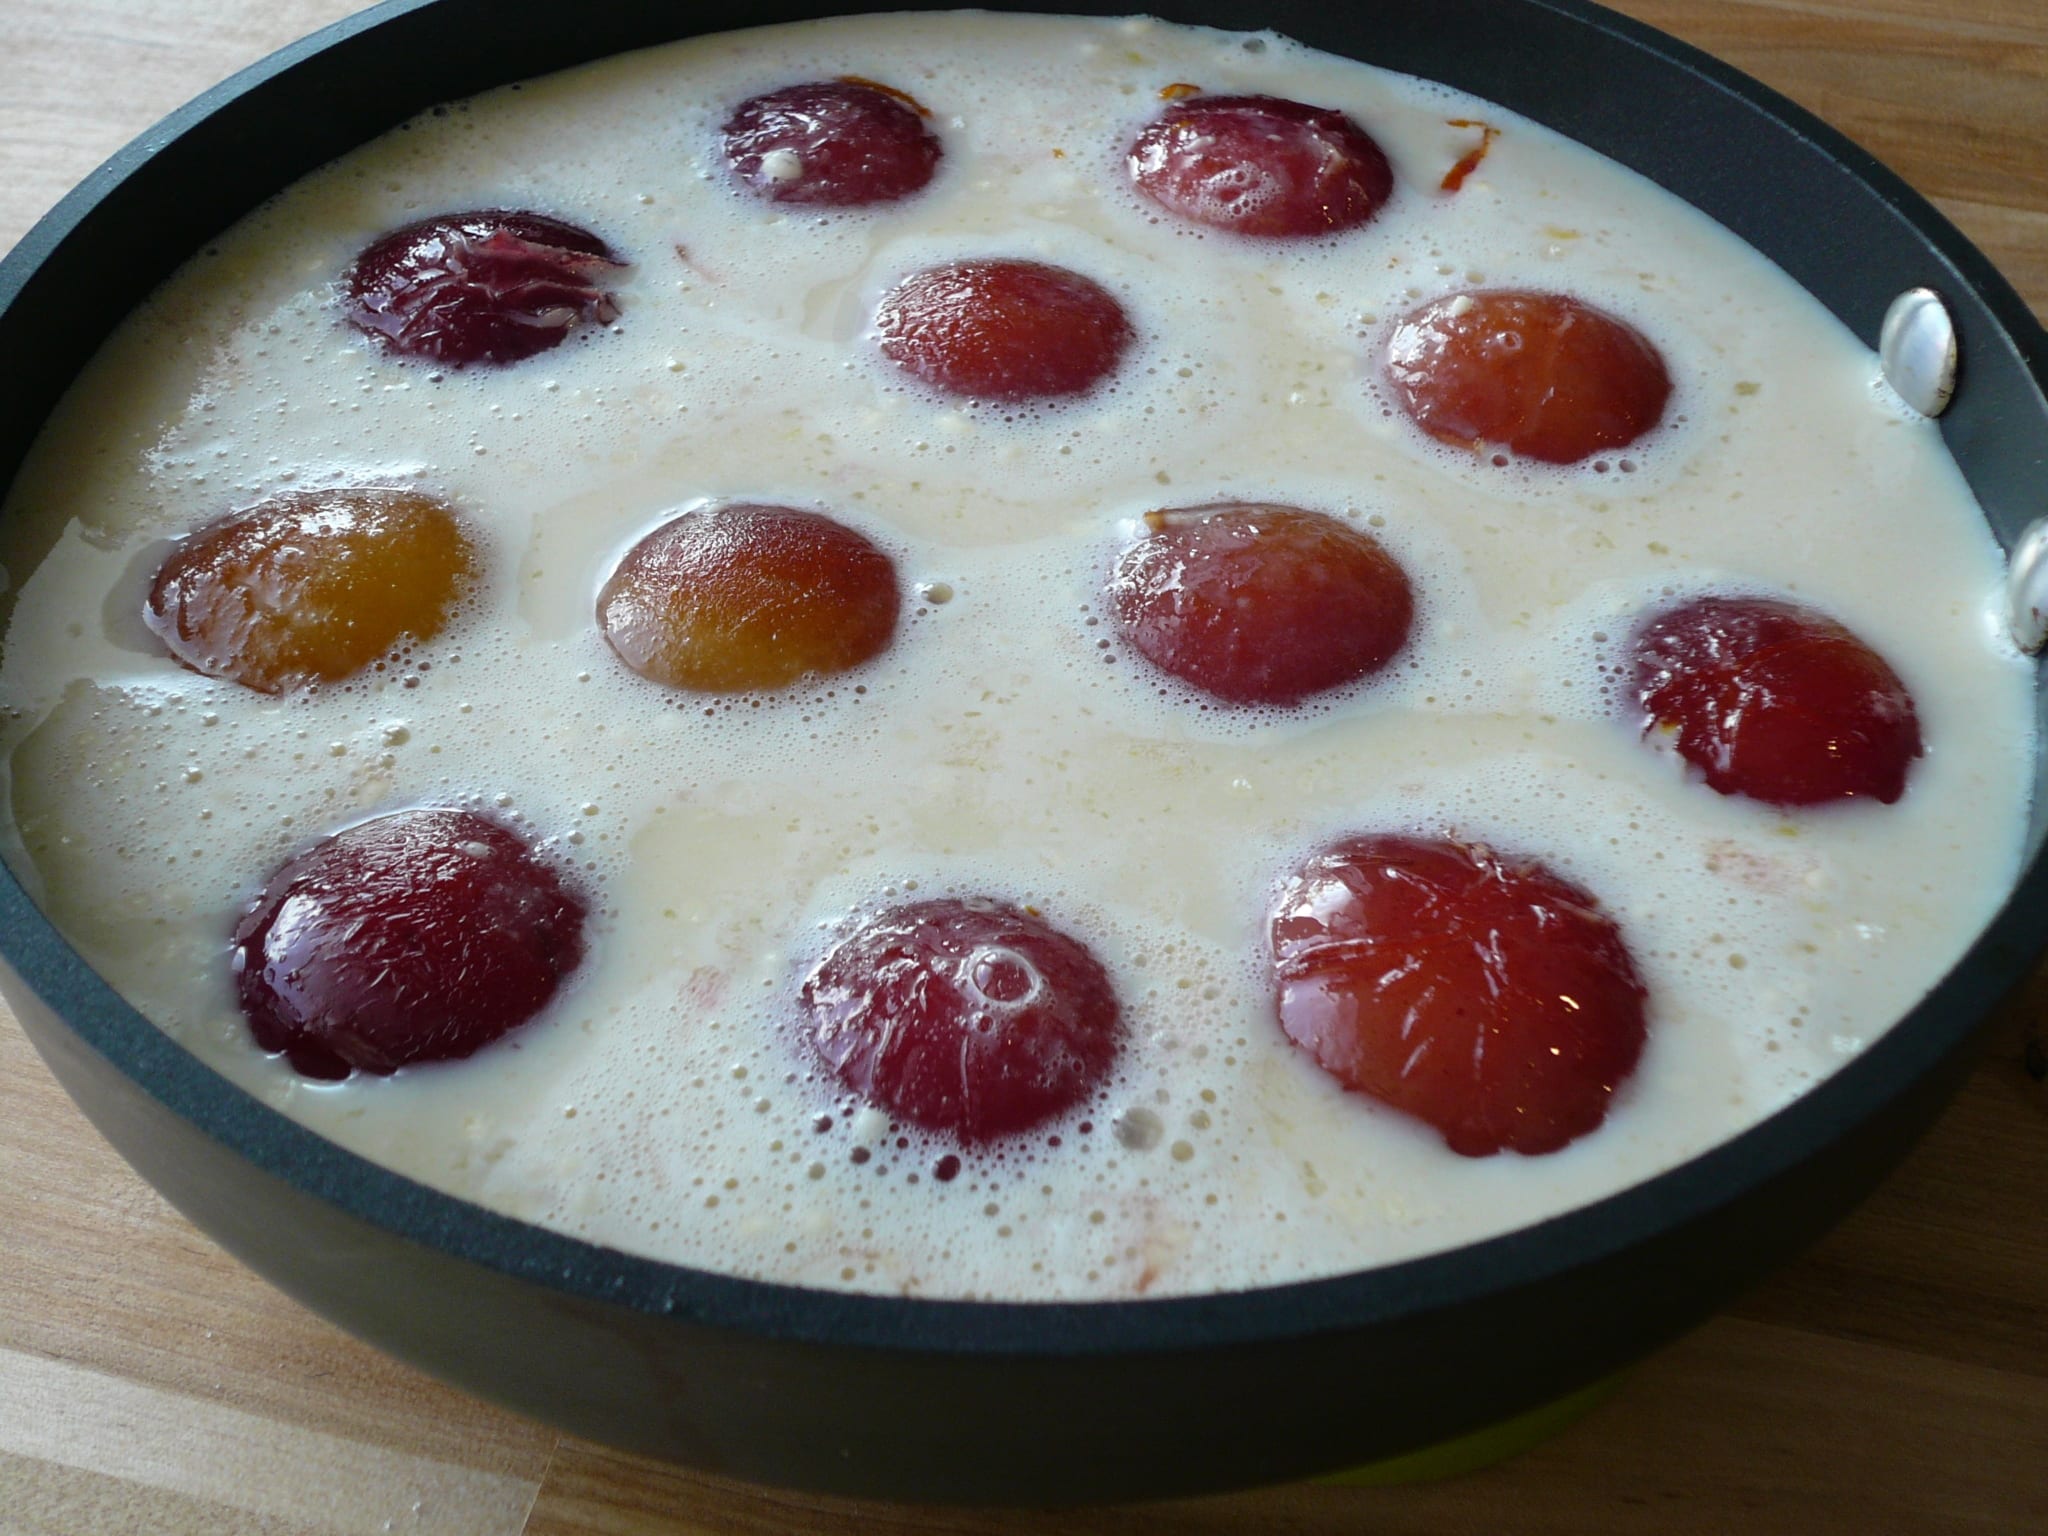 Roasted halved plums in batter ready for the oven